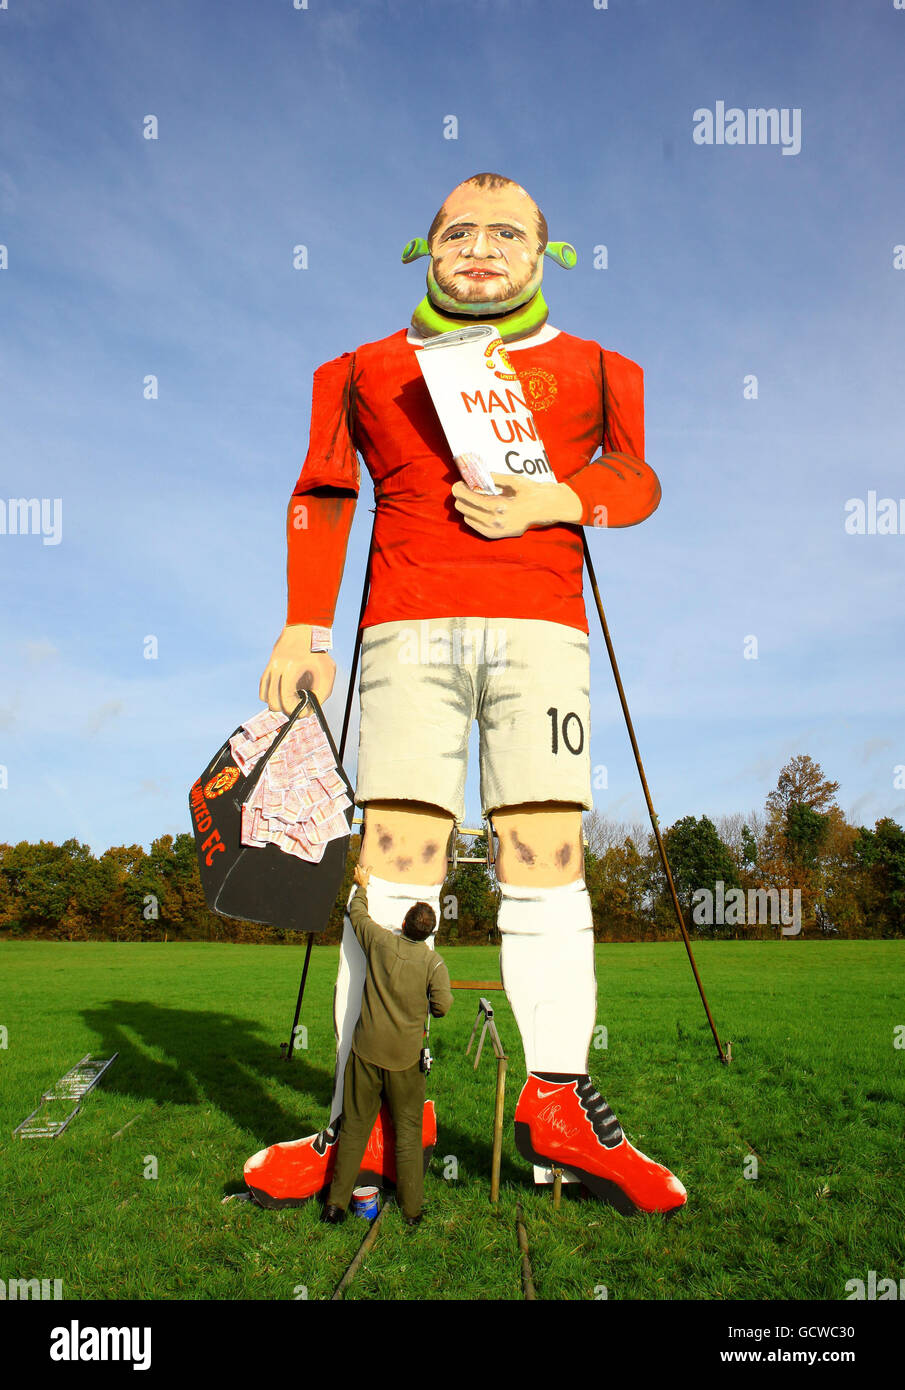 Barry Stableford of the Edenbridge Bonfire Society puts the final touches to the Edenbridge Celebrity Guy in Edenbridge, Kent, which this year is Wayne Rooney, ahead of the town's bonfire night display on Saturday. Stock Photo